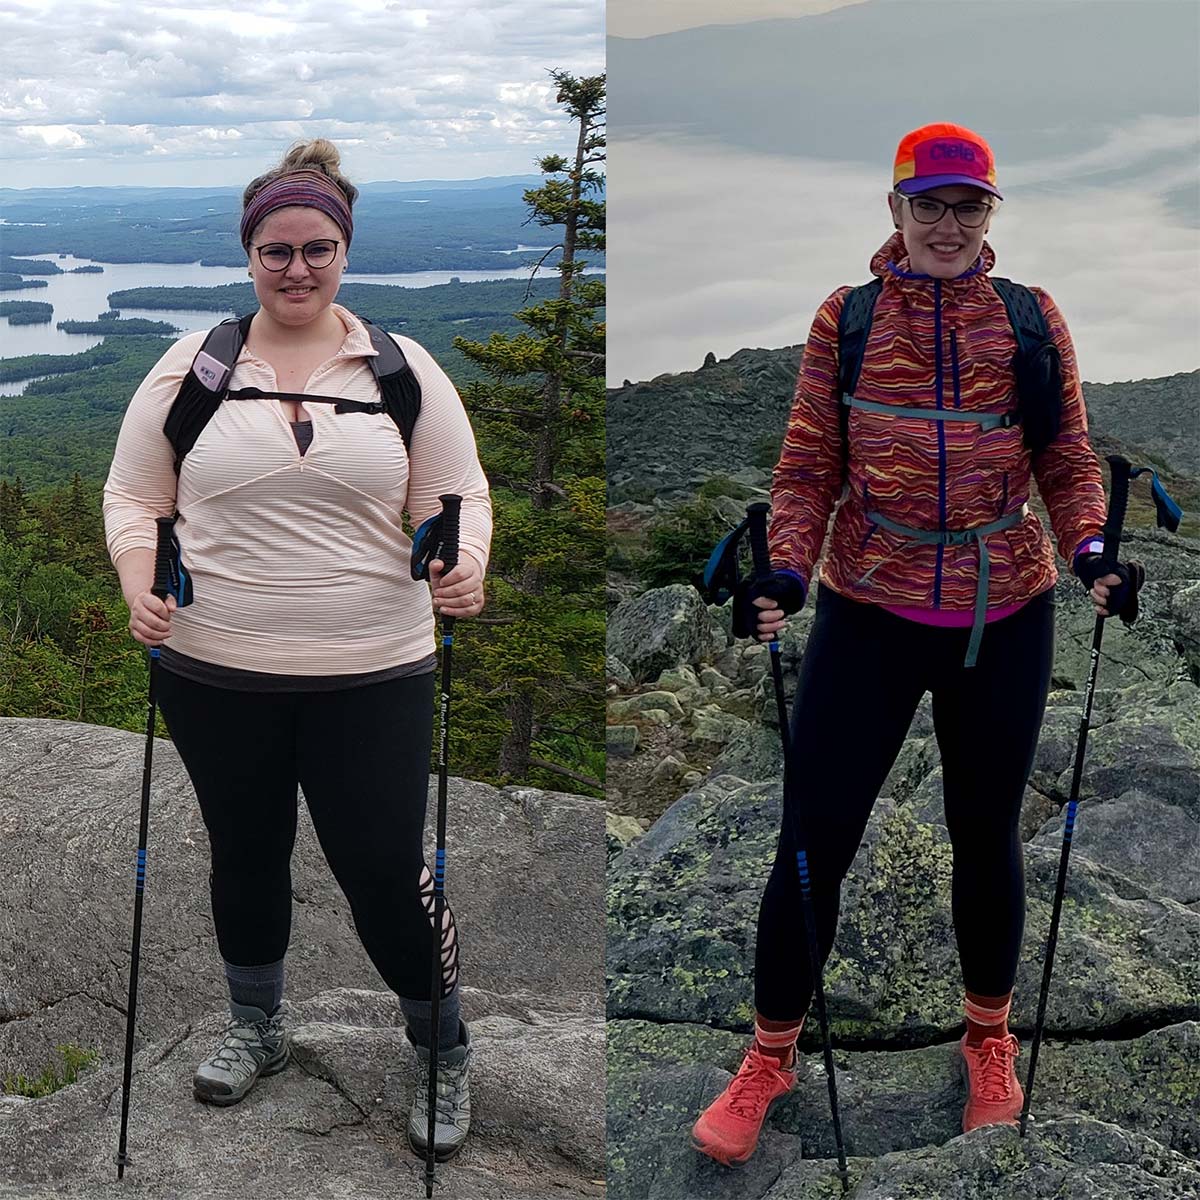 Weight loss surgery patient on a hike, before and after gastric bypass